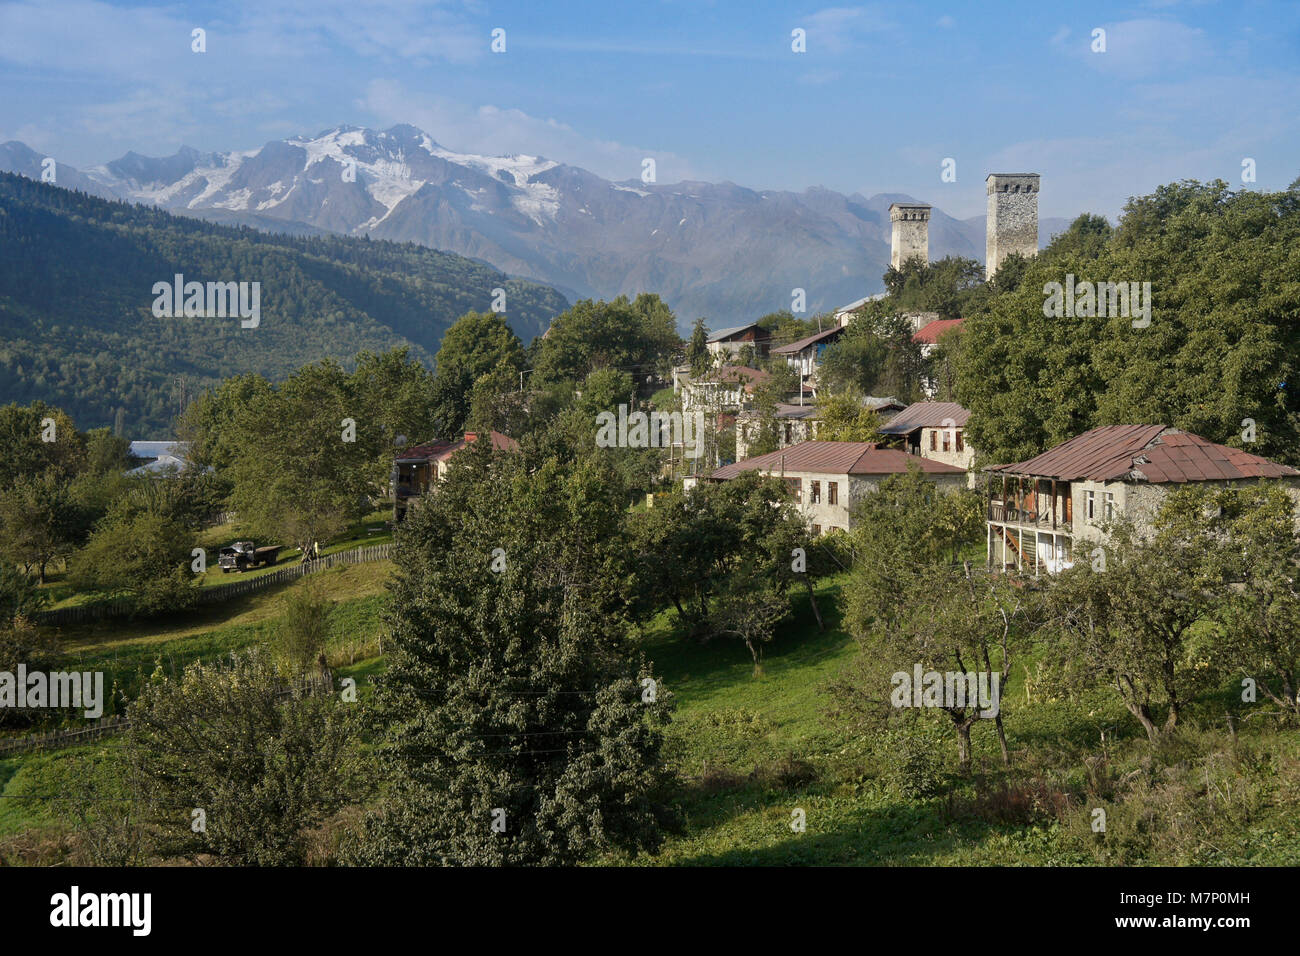 Historic tower houses stand amid more modern homes on a hillside in Mestia, Svaneti region of the Caucasus Mountains, Georgia Stock Photo